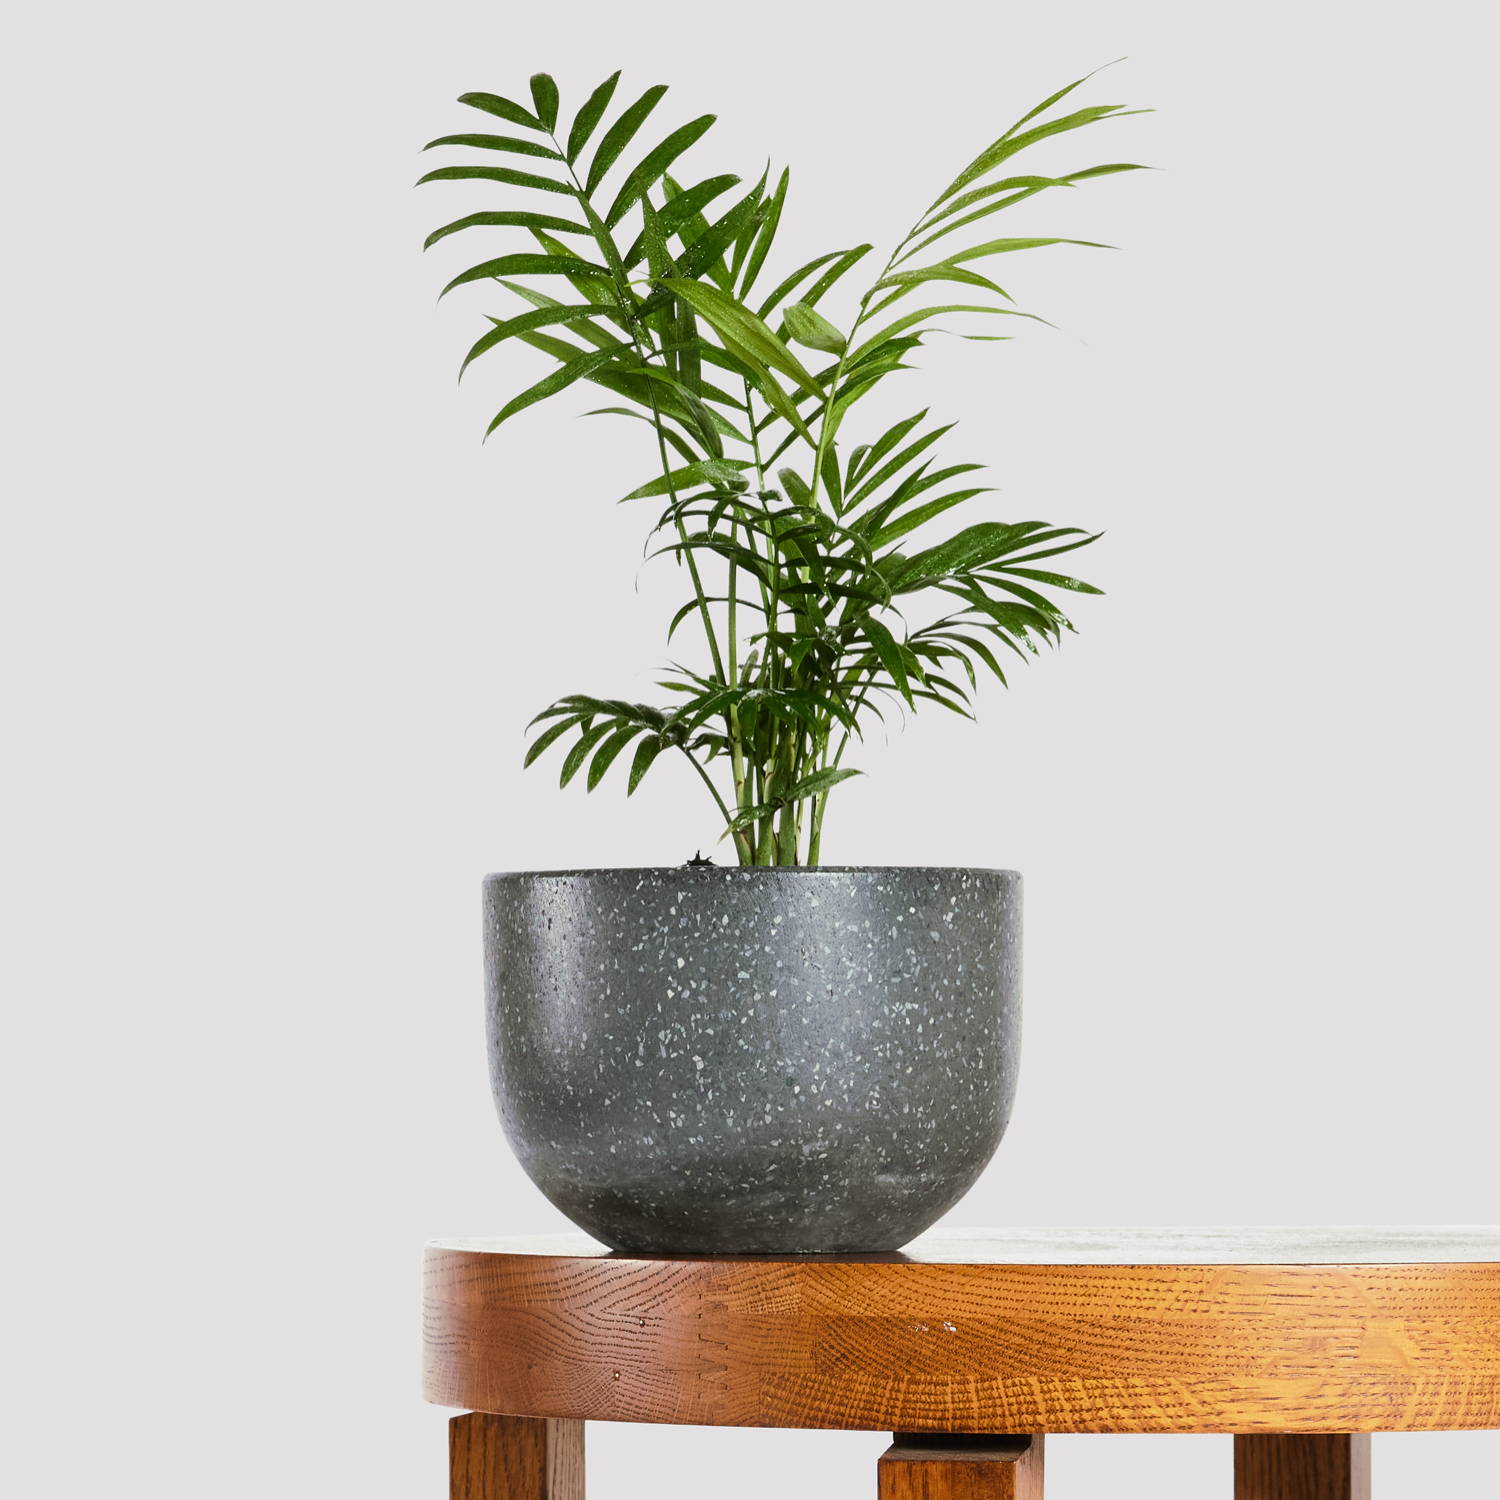 Bamboo Parlor Palm in Pierre Terrazzo Pot Black at The Good Plant Co